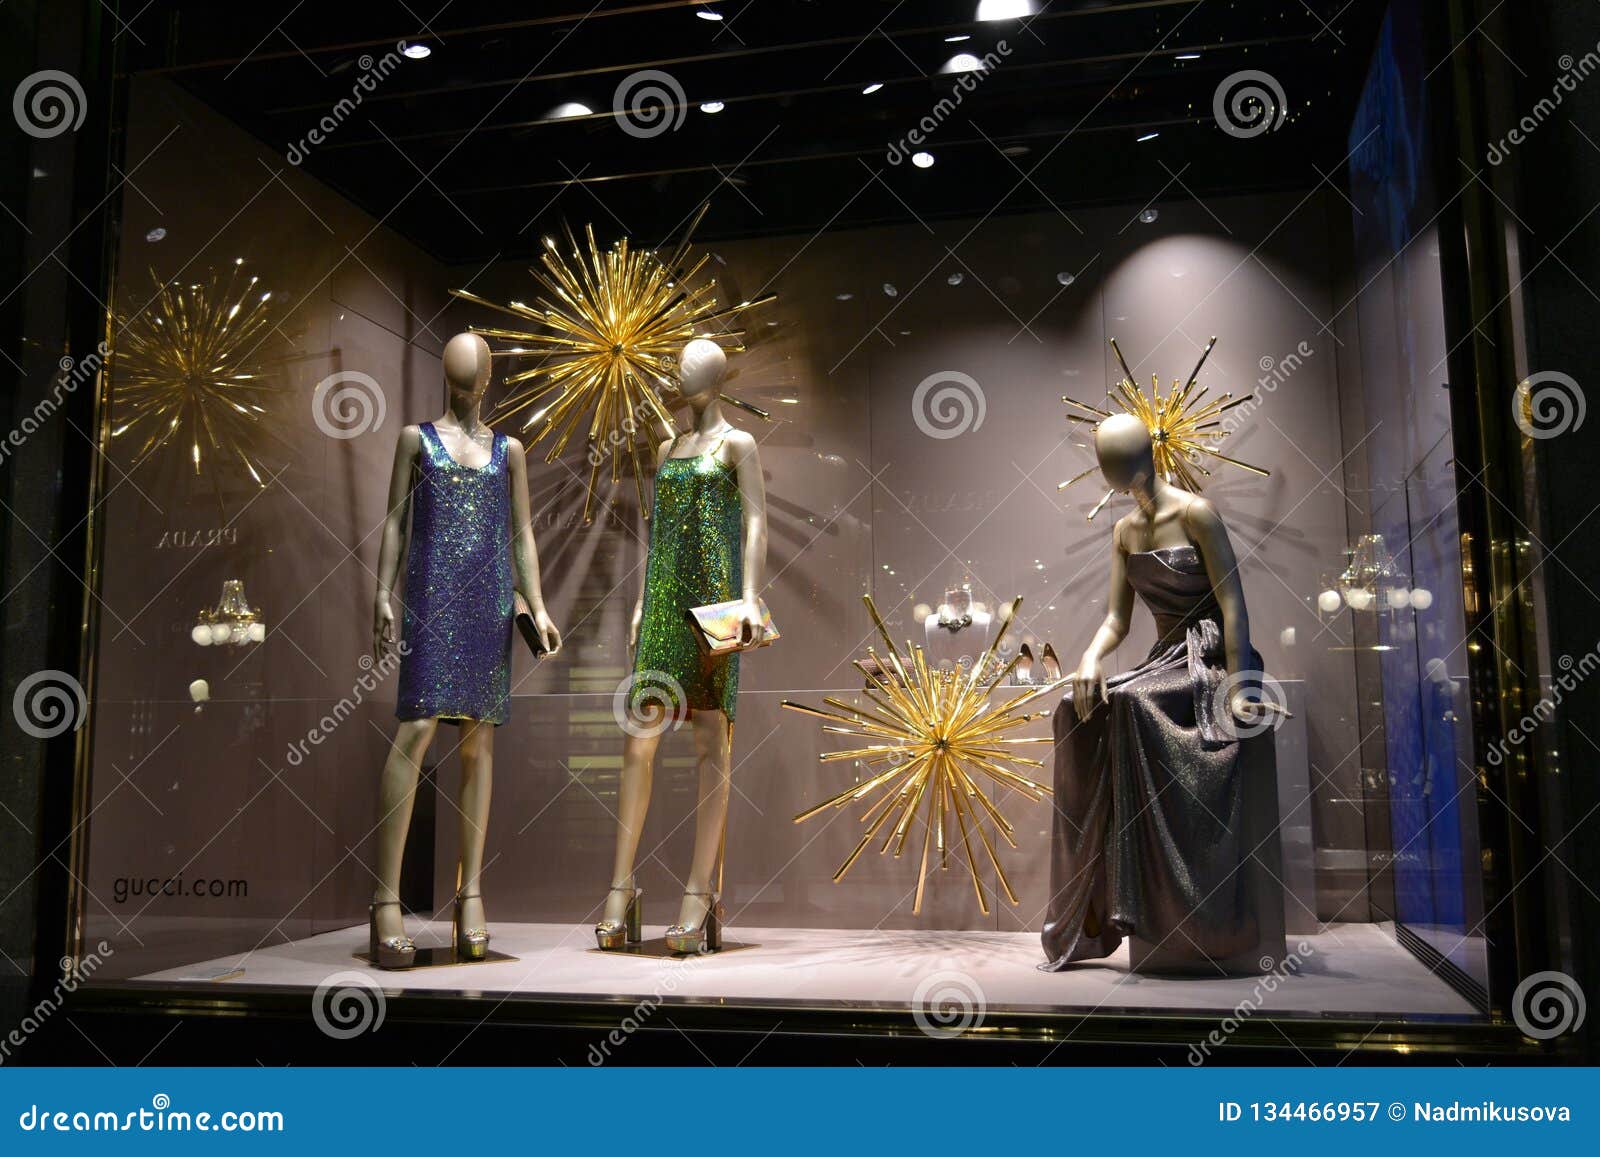 Window of the Gucci Fashion Boutique Decorated for the Christmas Holidays.  Editorial Photography - Image of fabric, dummy: 134466957